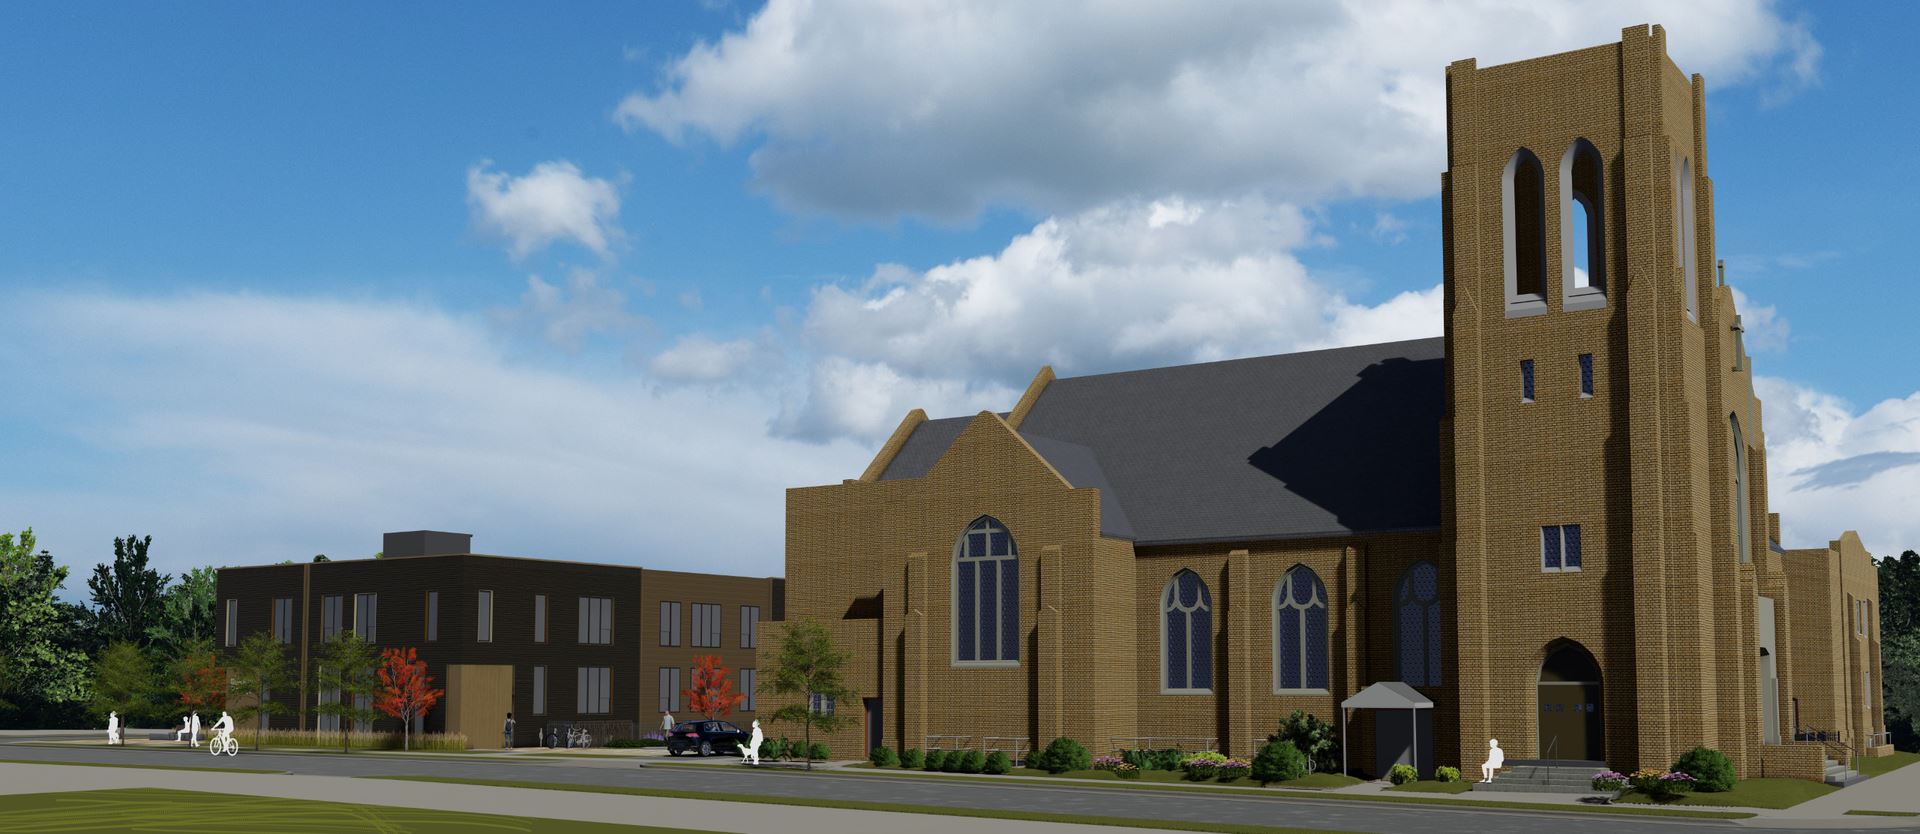 Rendering of Calvary Lutheran Church with the newly built, 2.5 story building next to it, blue skies overhead with a few, fluffy clouds